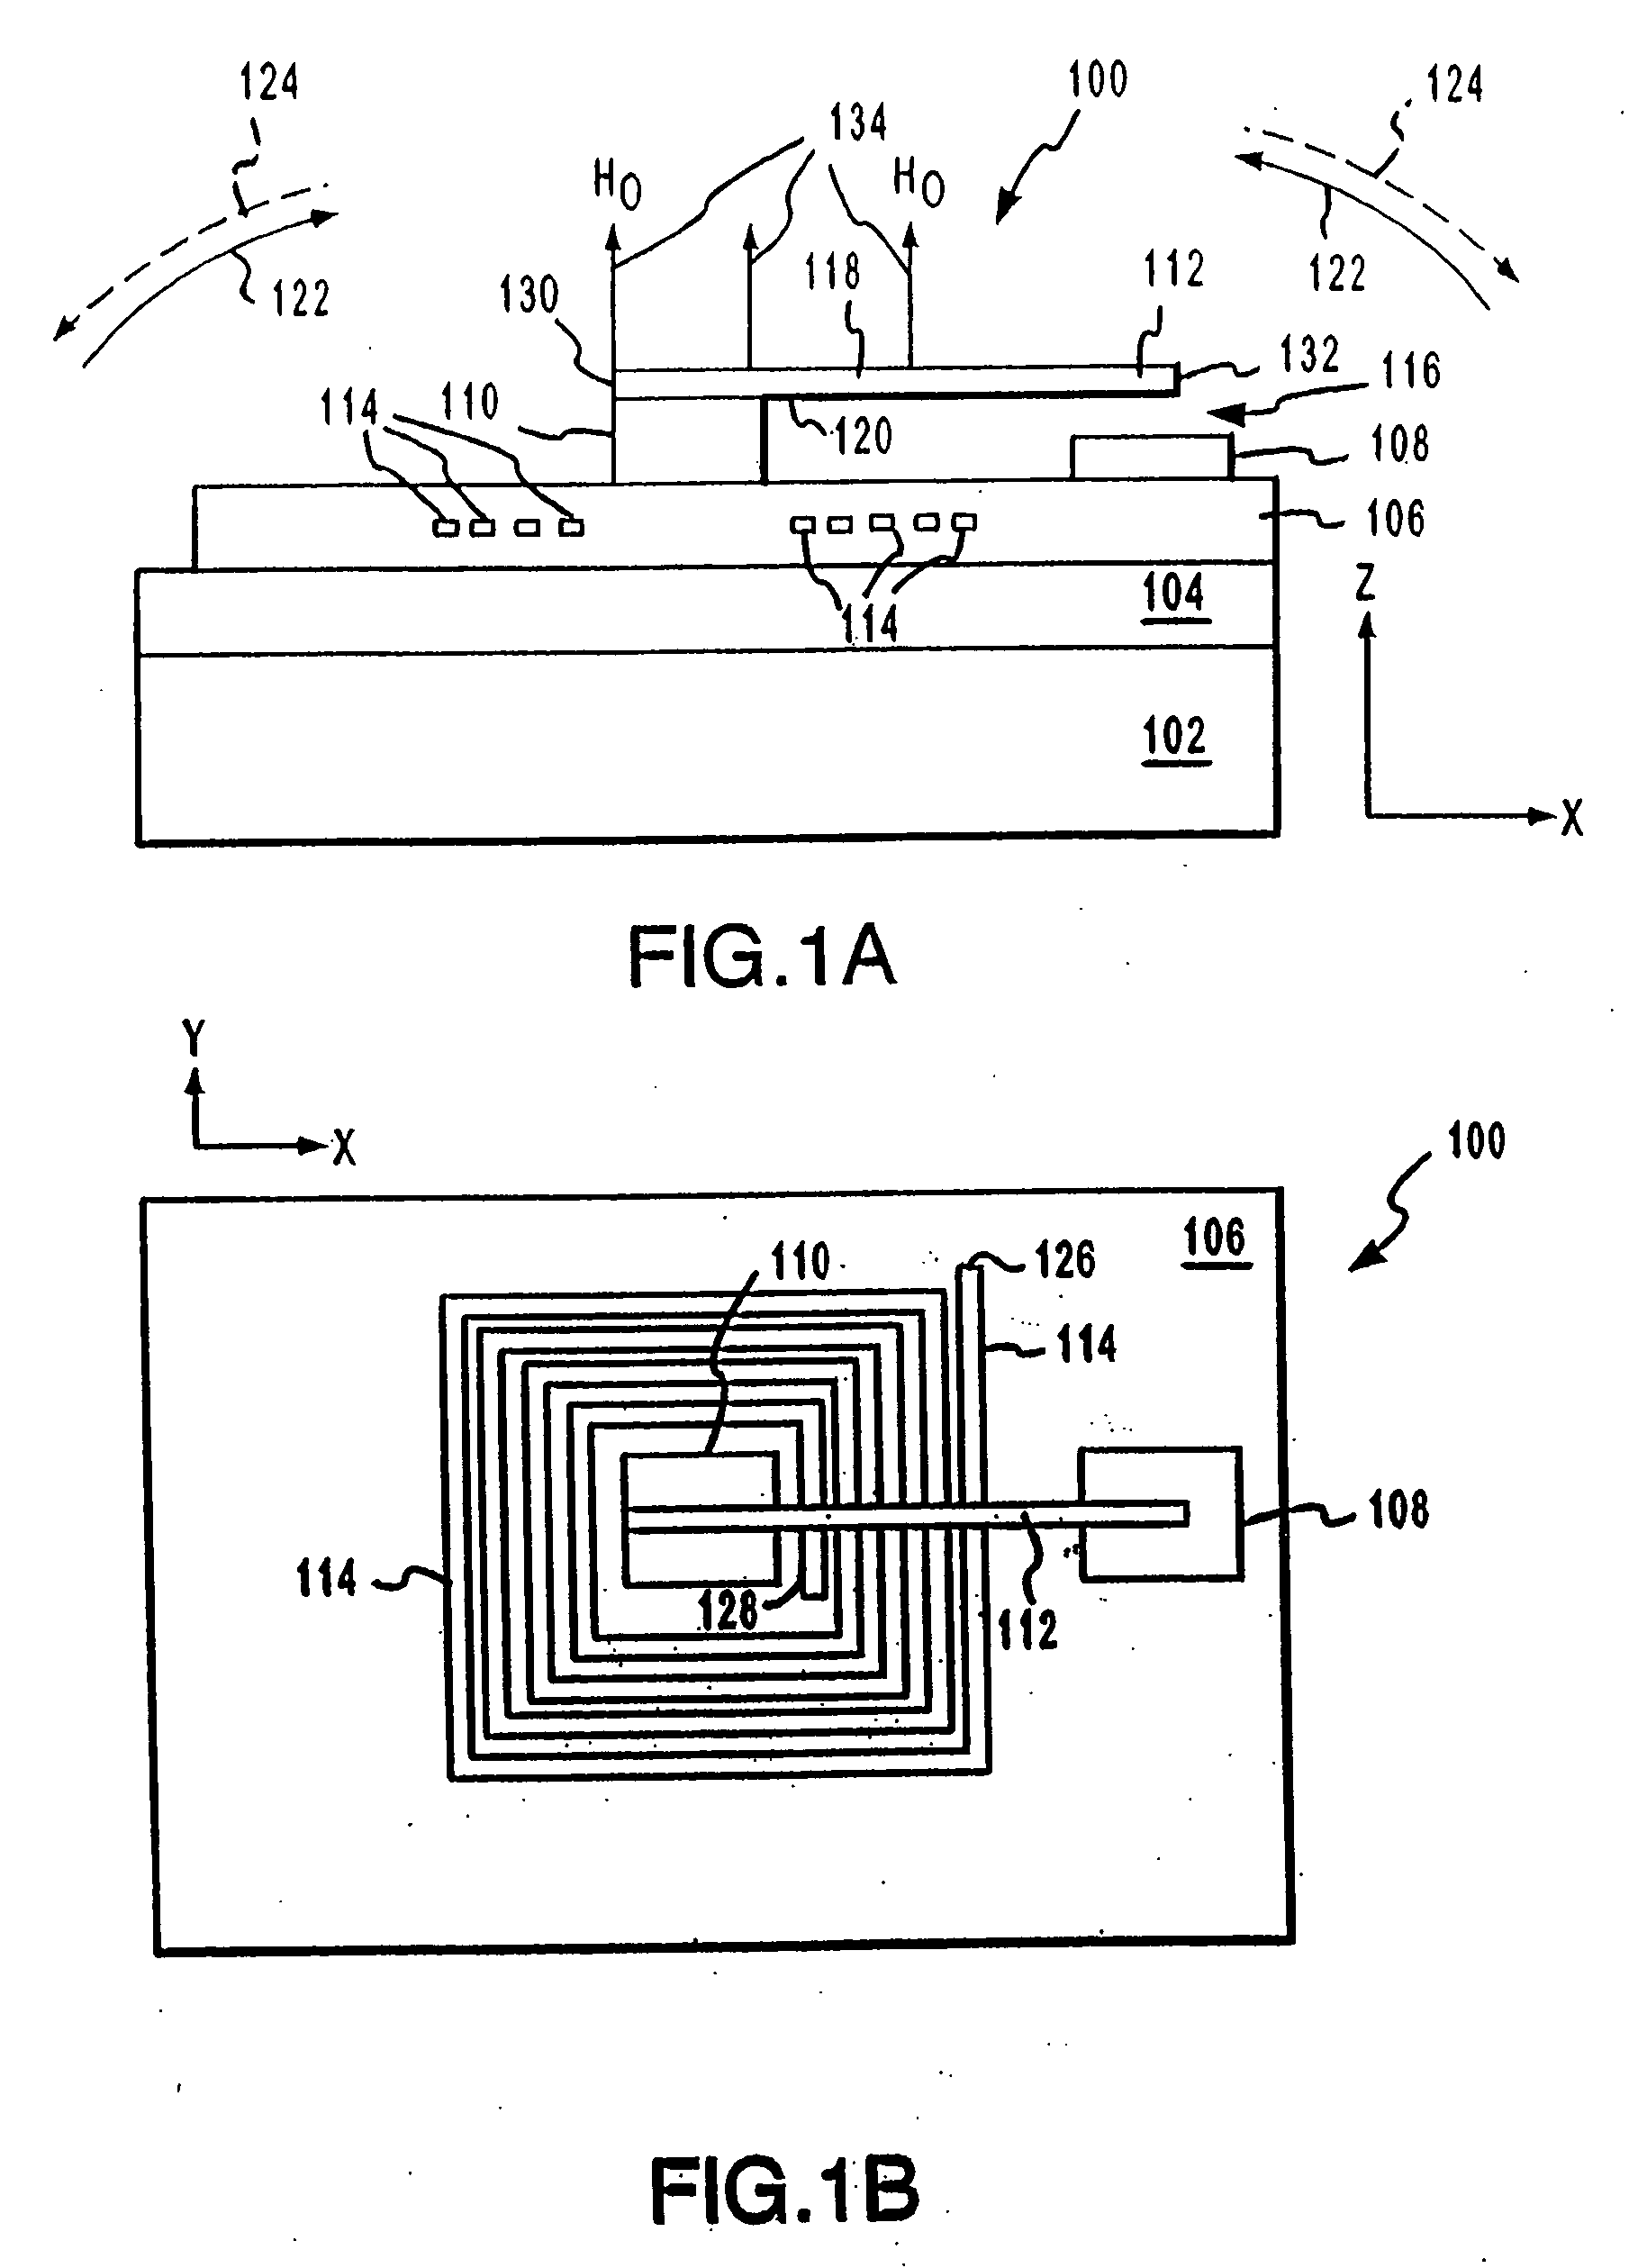 Micro-magnetic latching switches with a three-dimensional solenoid coil